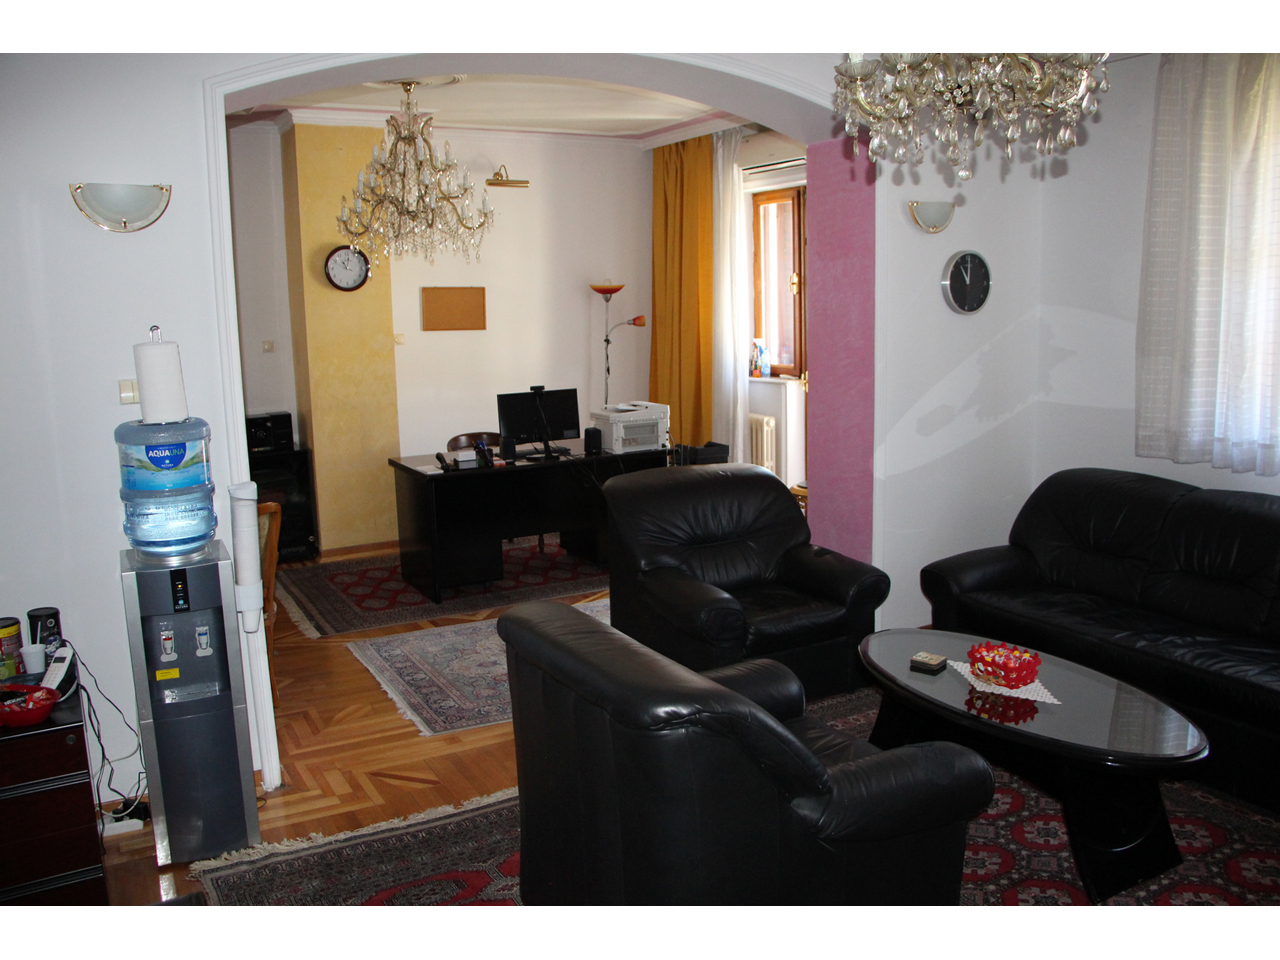 EPISTEMA PSYCHIATRY AND PSYCHOTHERAPY MEDICAL OFFICE Psychotherapists, psychotherapy Belgrade - Photo 9